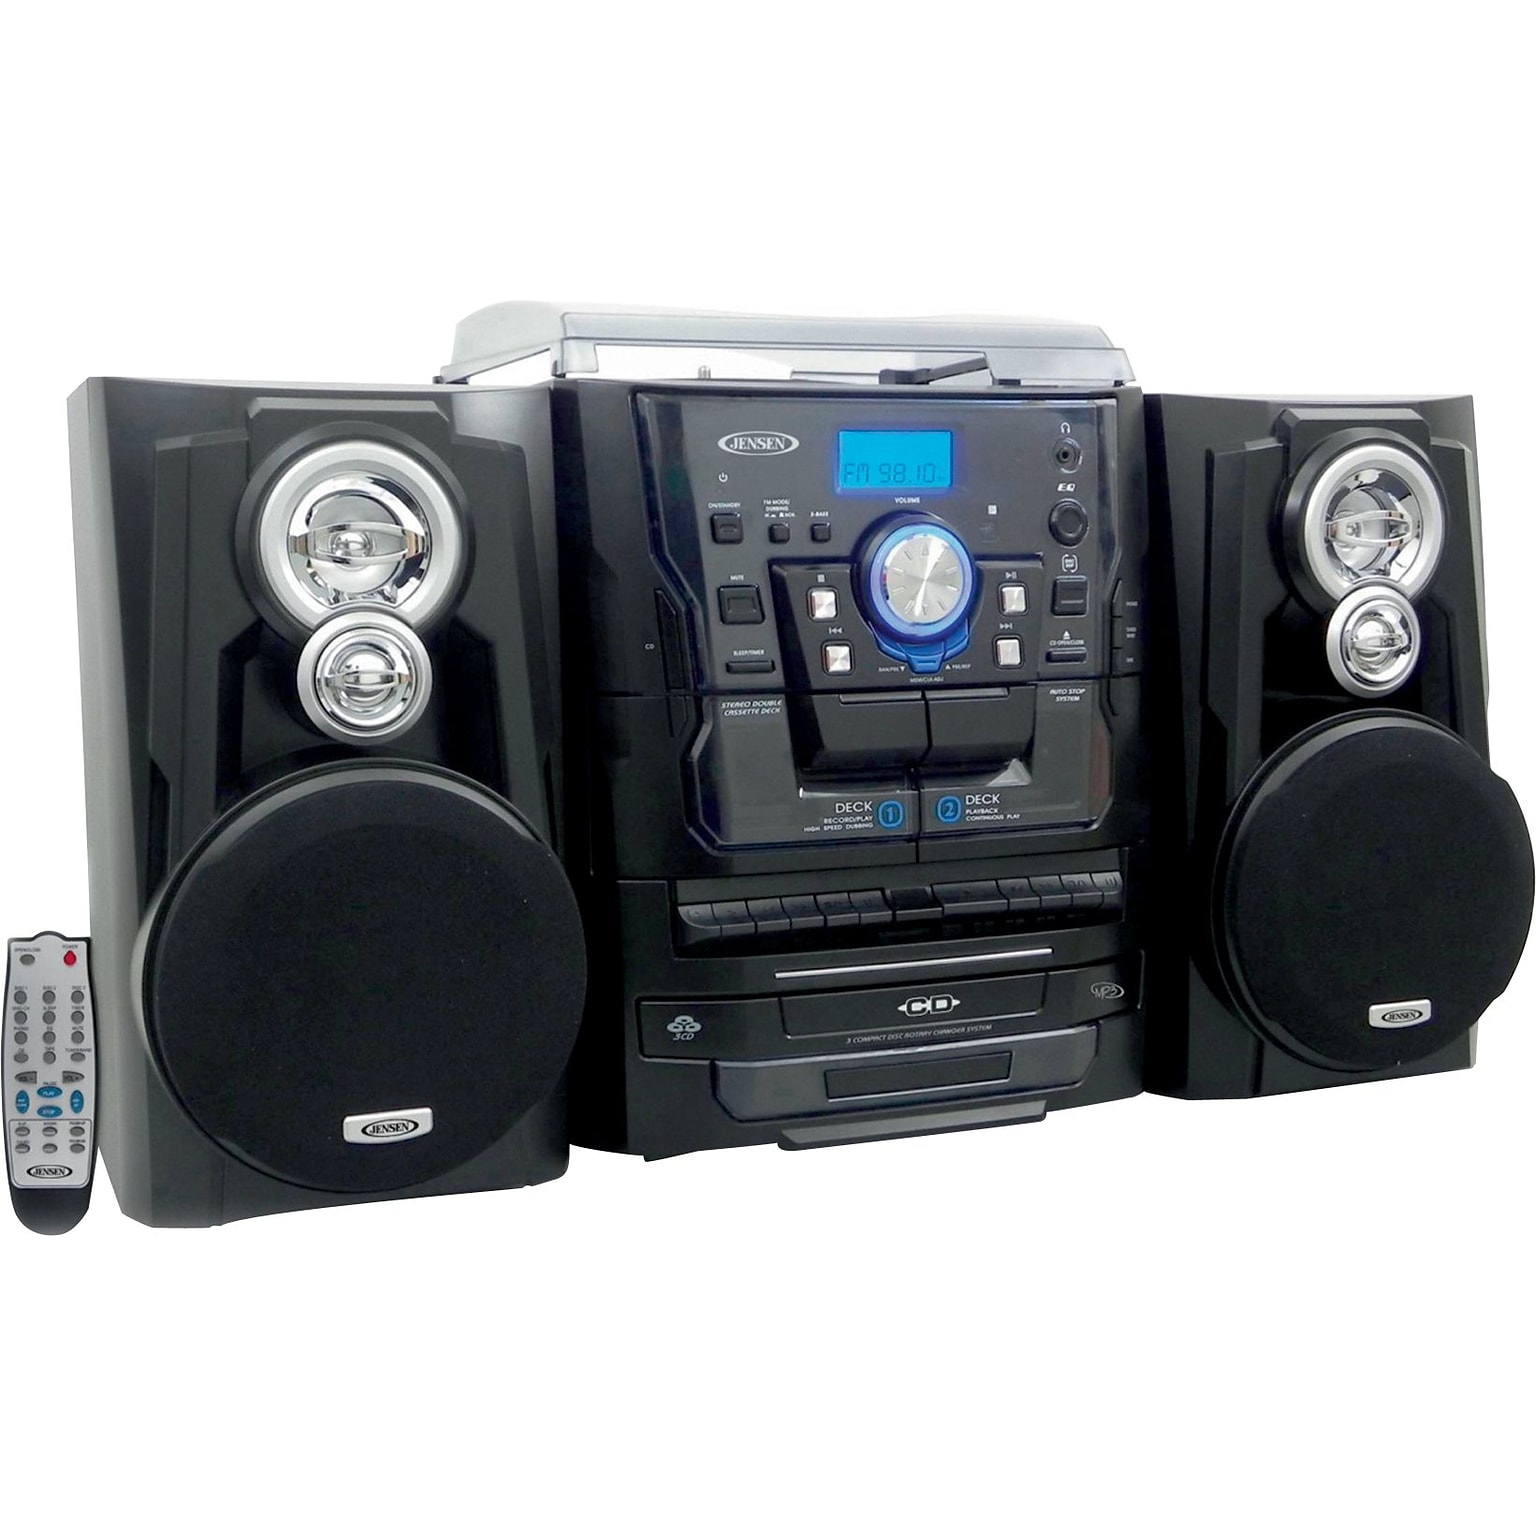 Jensen Bluetooth 3-Speed Stereo Turntable Music System with 3-CD Changer & Dual Cassette Deck (JMC-1250)